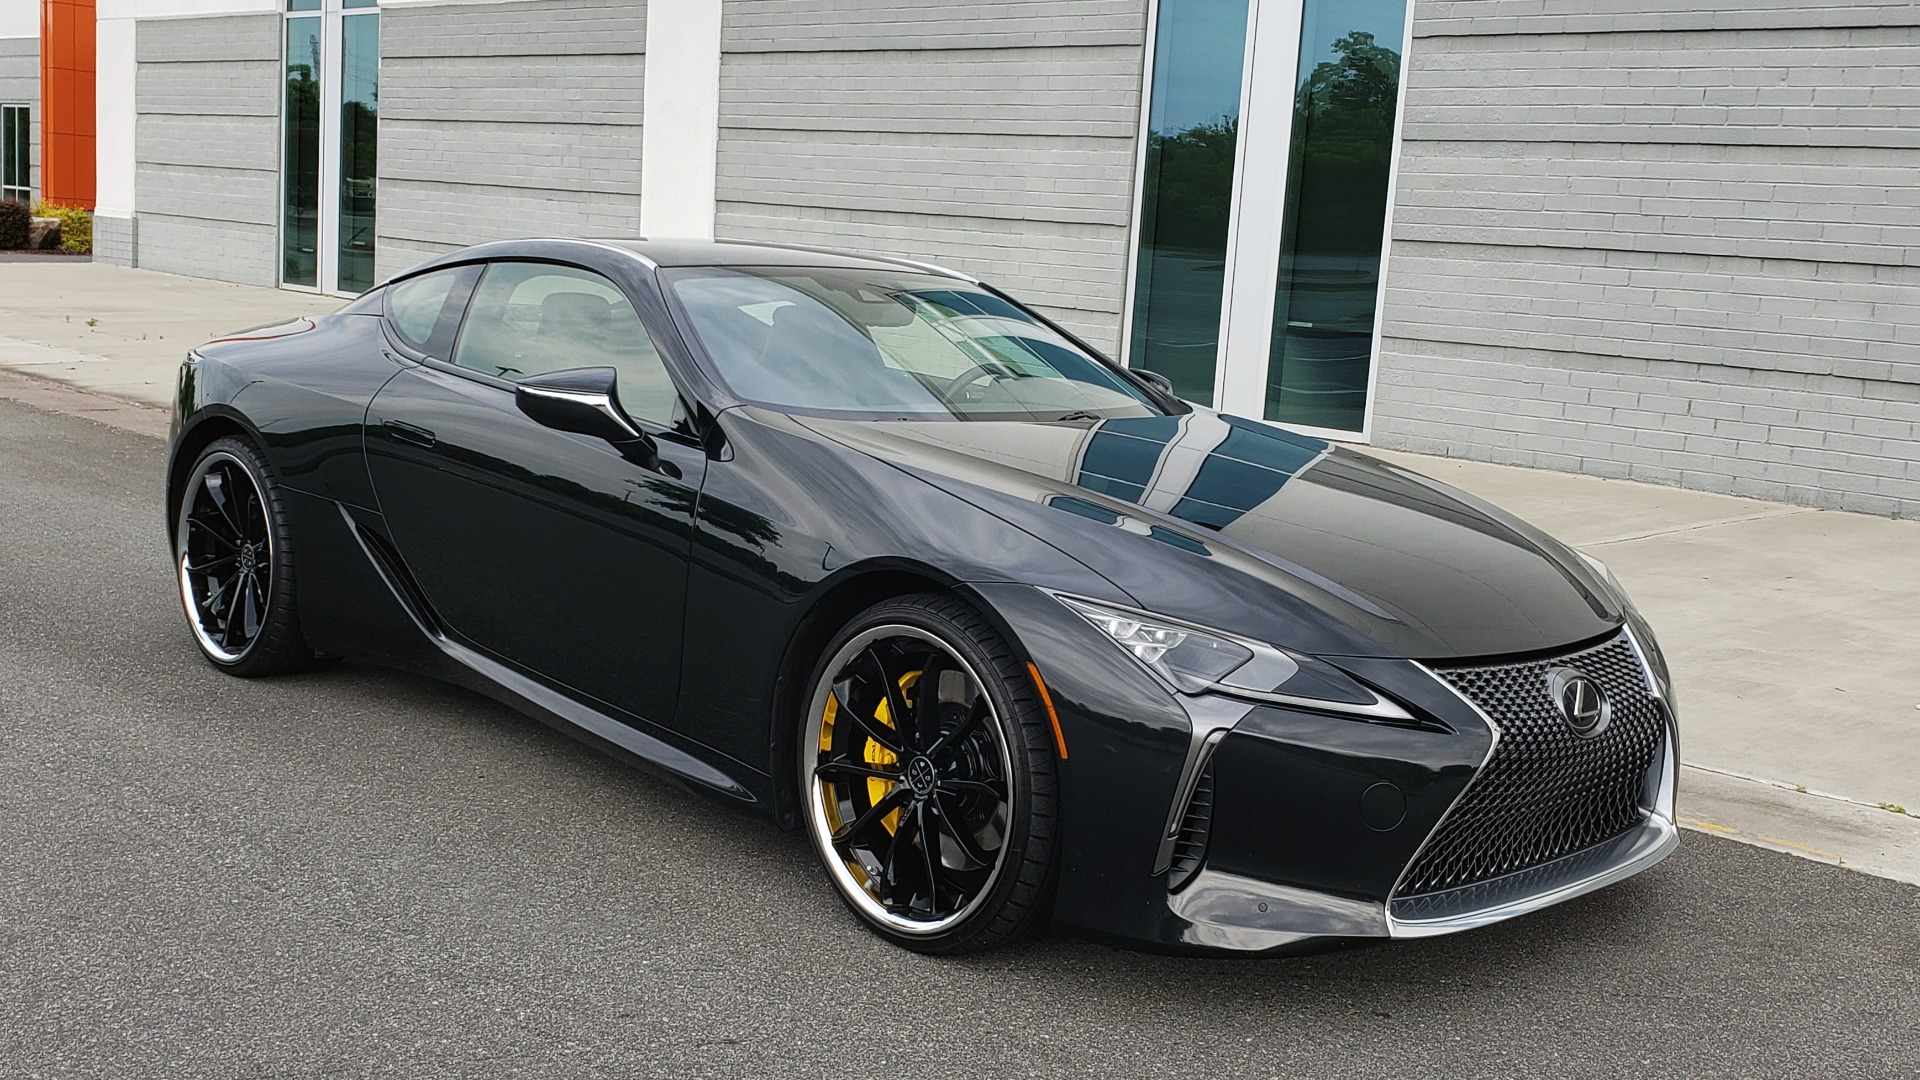 Used 2018 Lexus LC 500 COUPE / 5.0L V8 (471HP) / 10-SPD AUTO / HUD / SUNROOF / REARVIEW for sale Sold at Formula Imports in Charlotte NC 28227 9